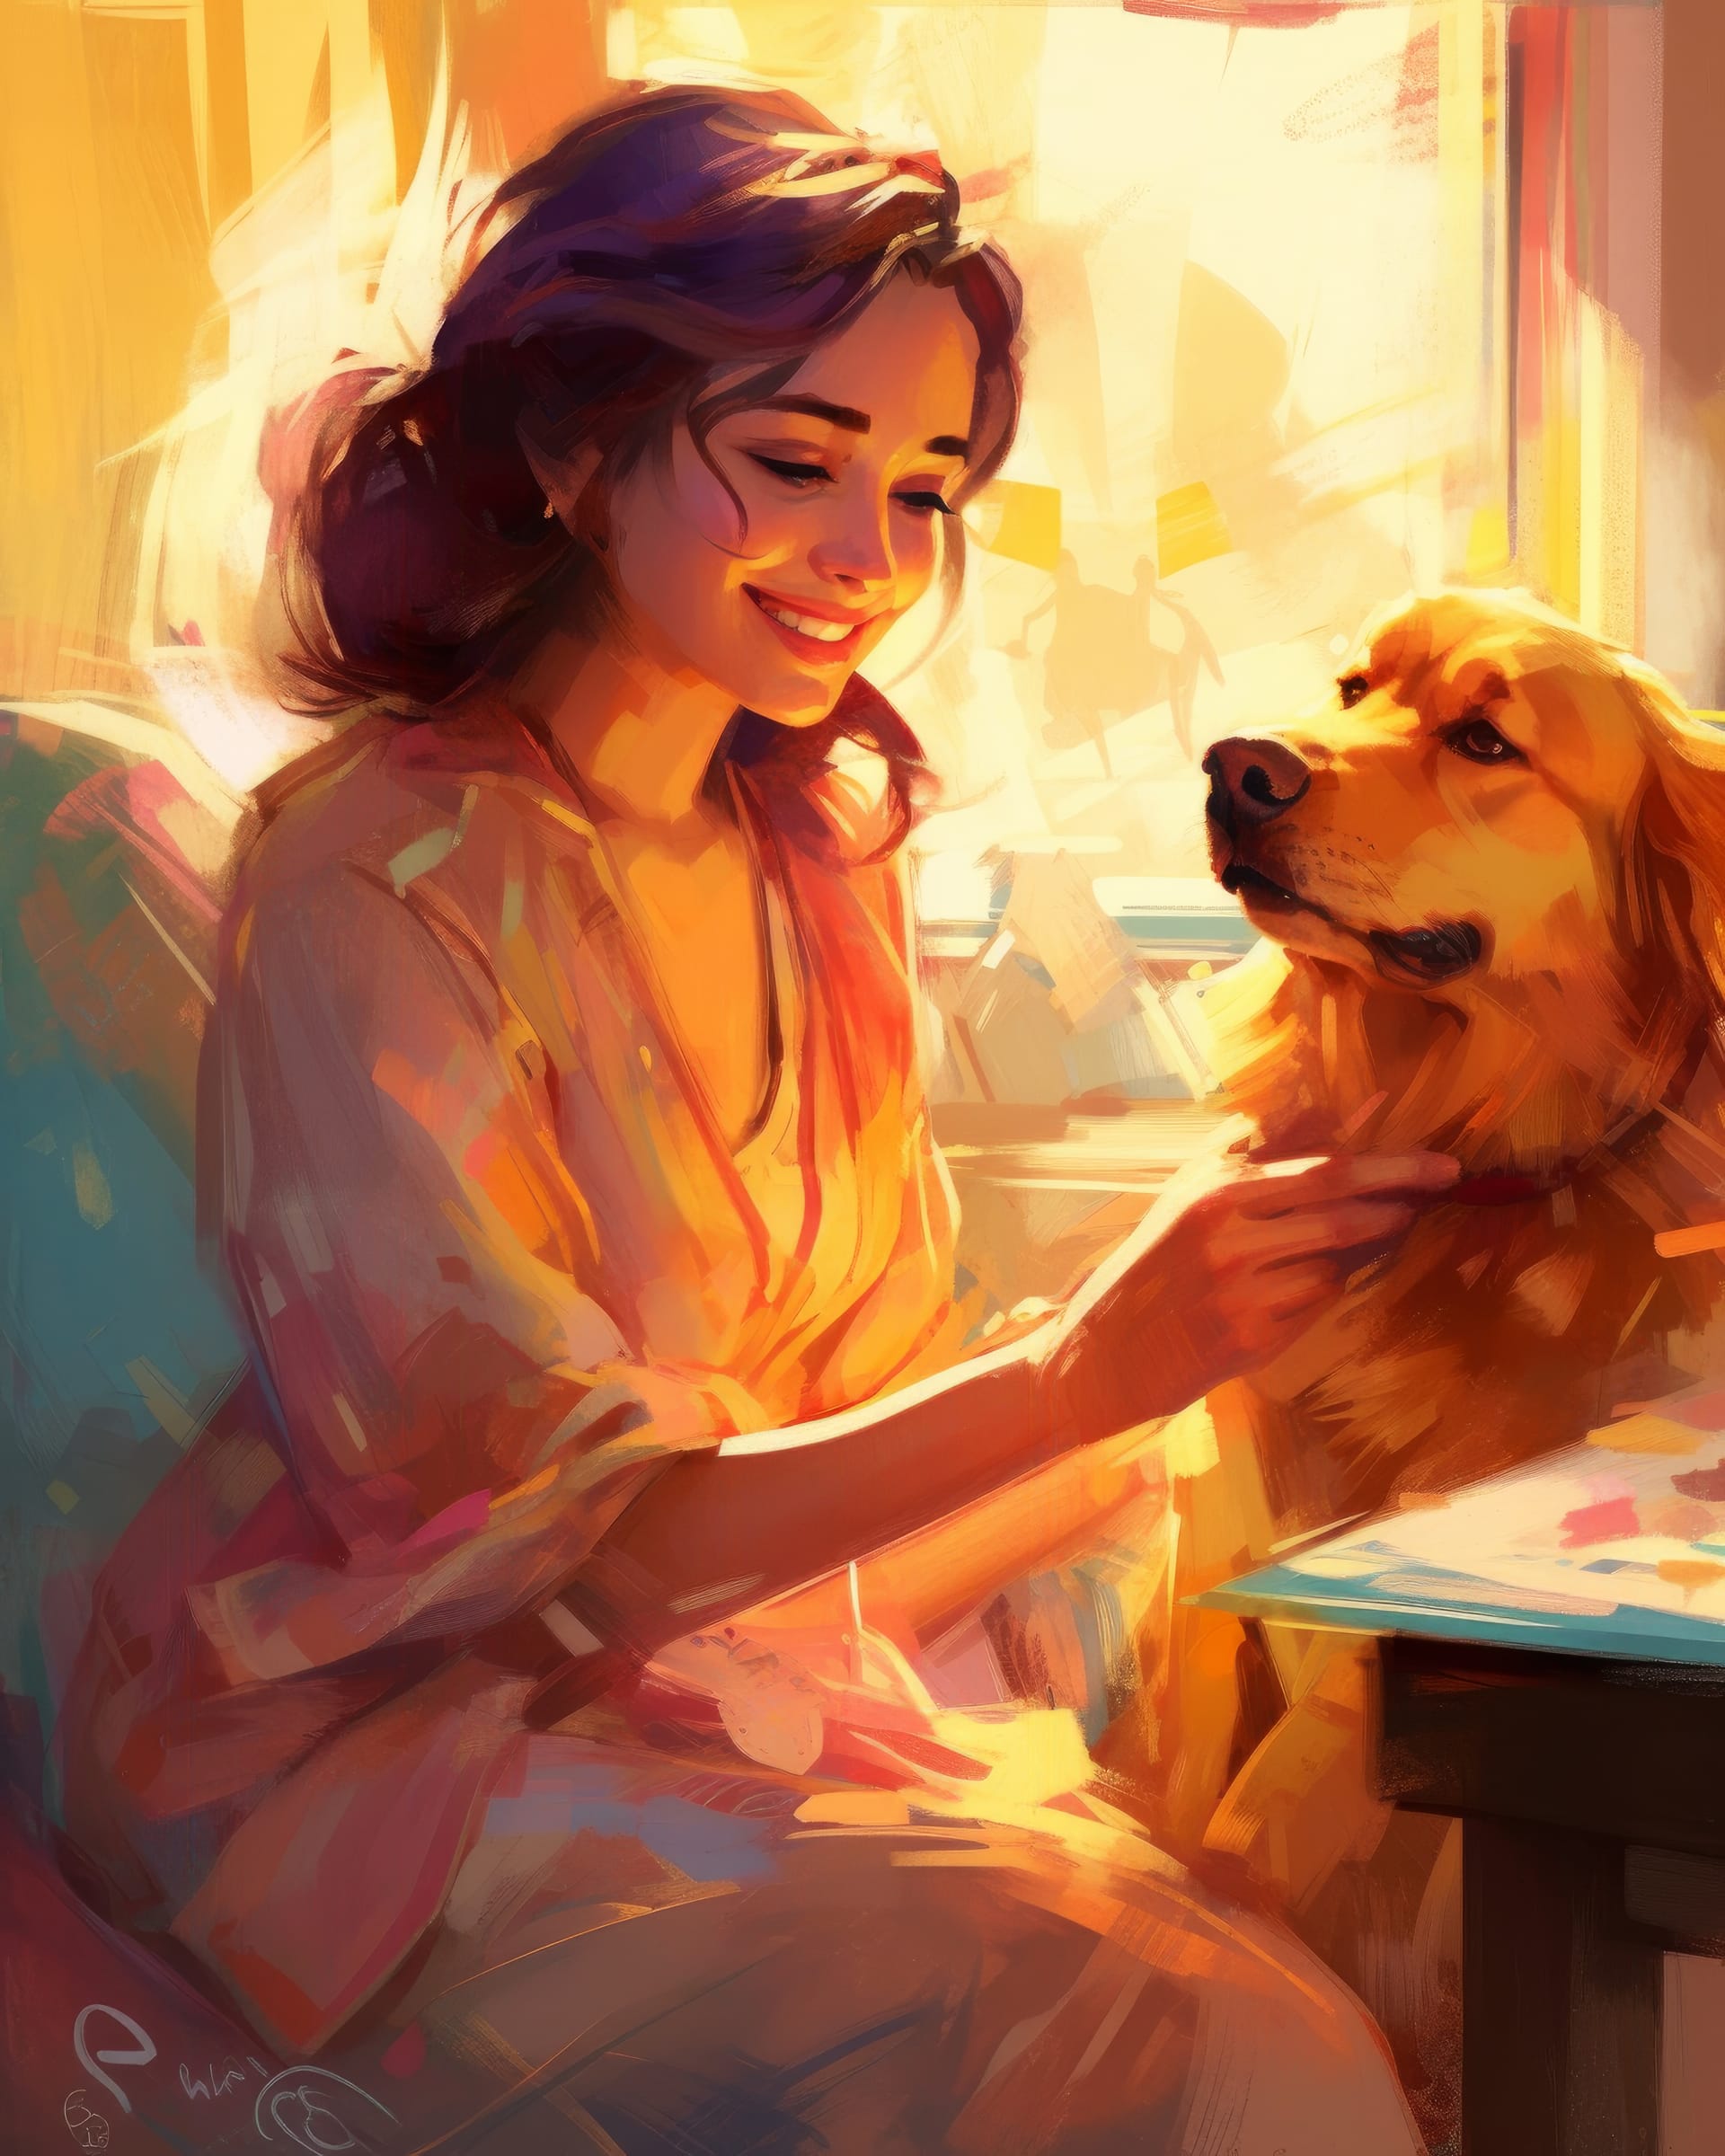 Painting girl and dog are sitting front window